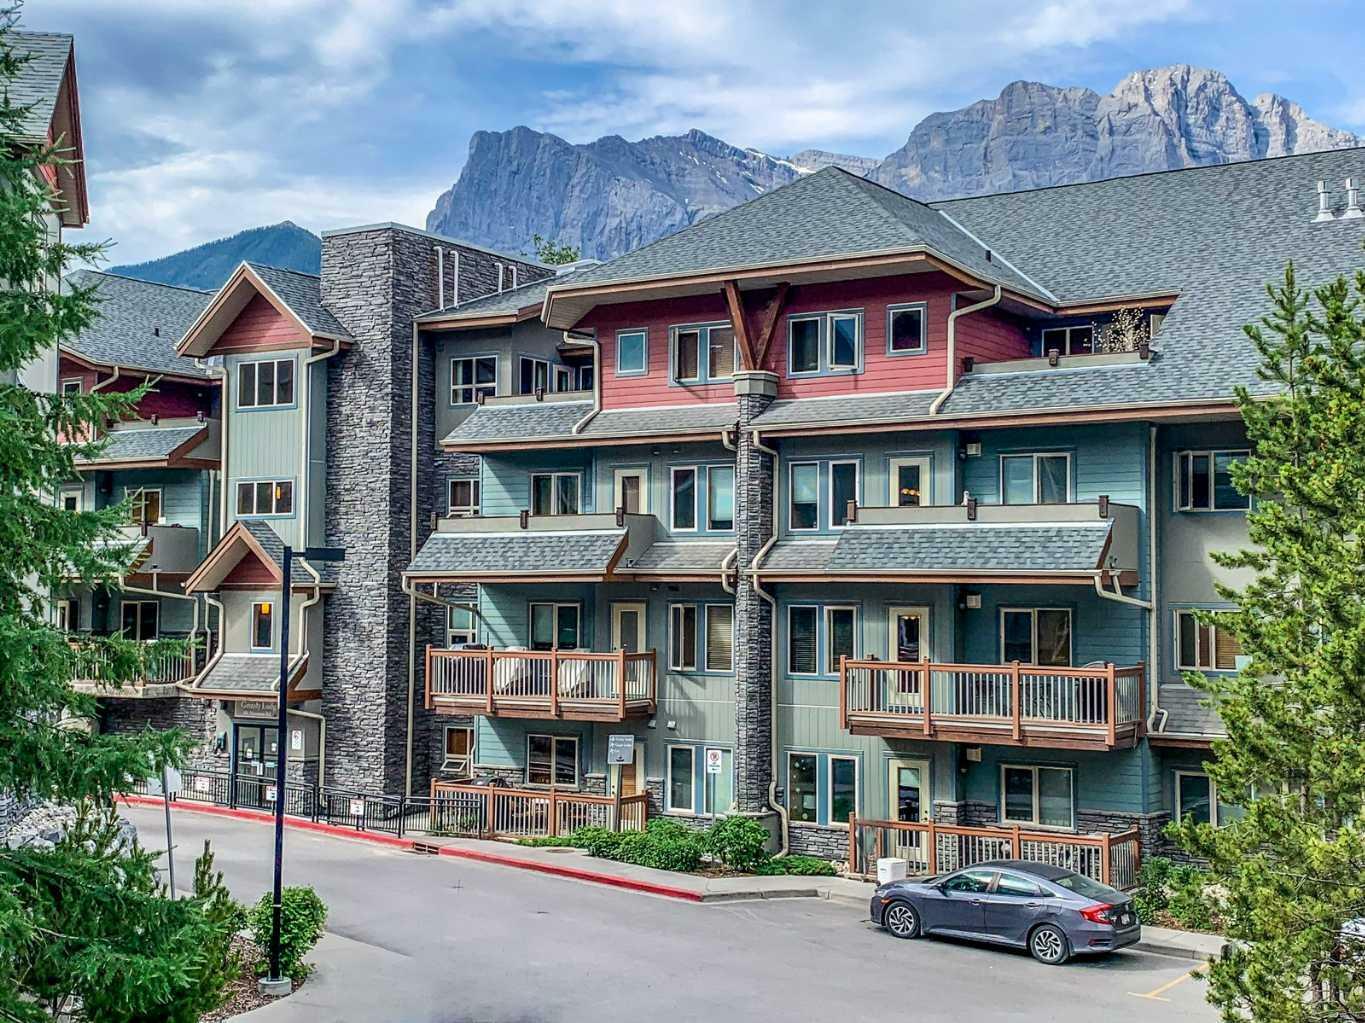 101 Montane Road 222  Canmore AB T1W 0G2 photo